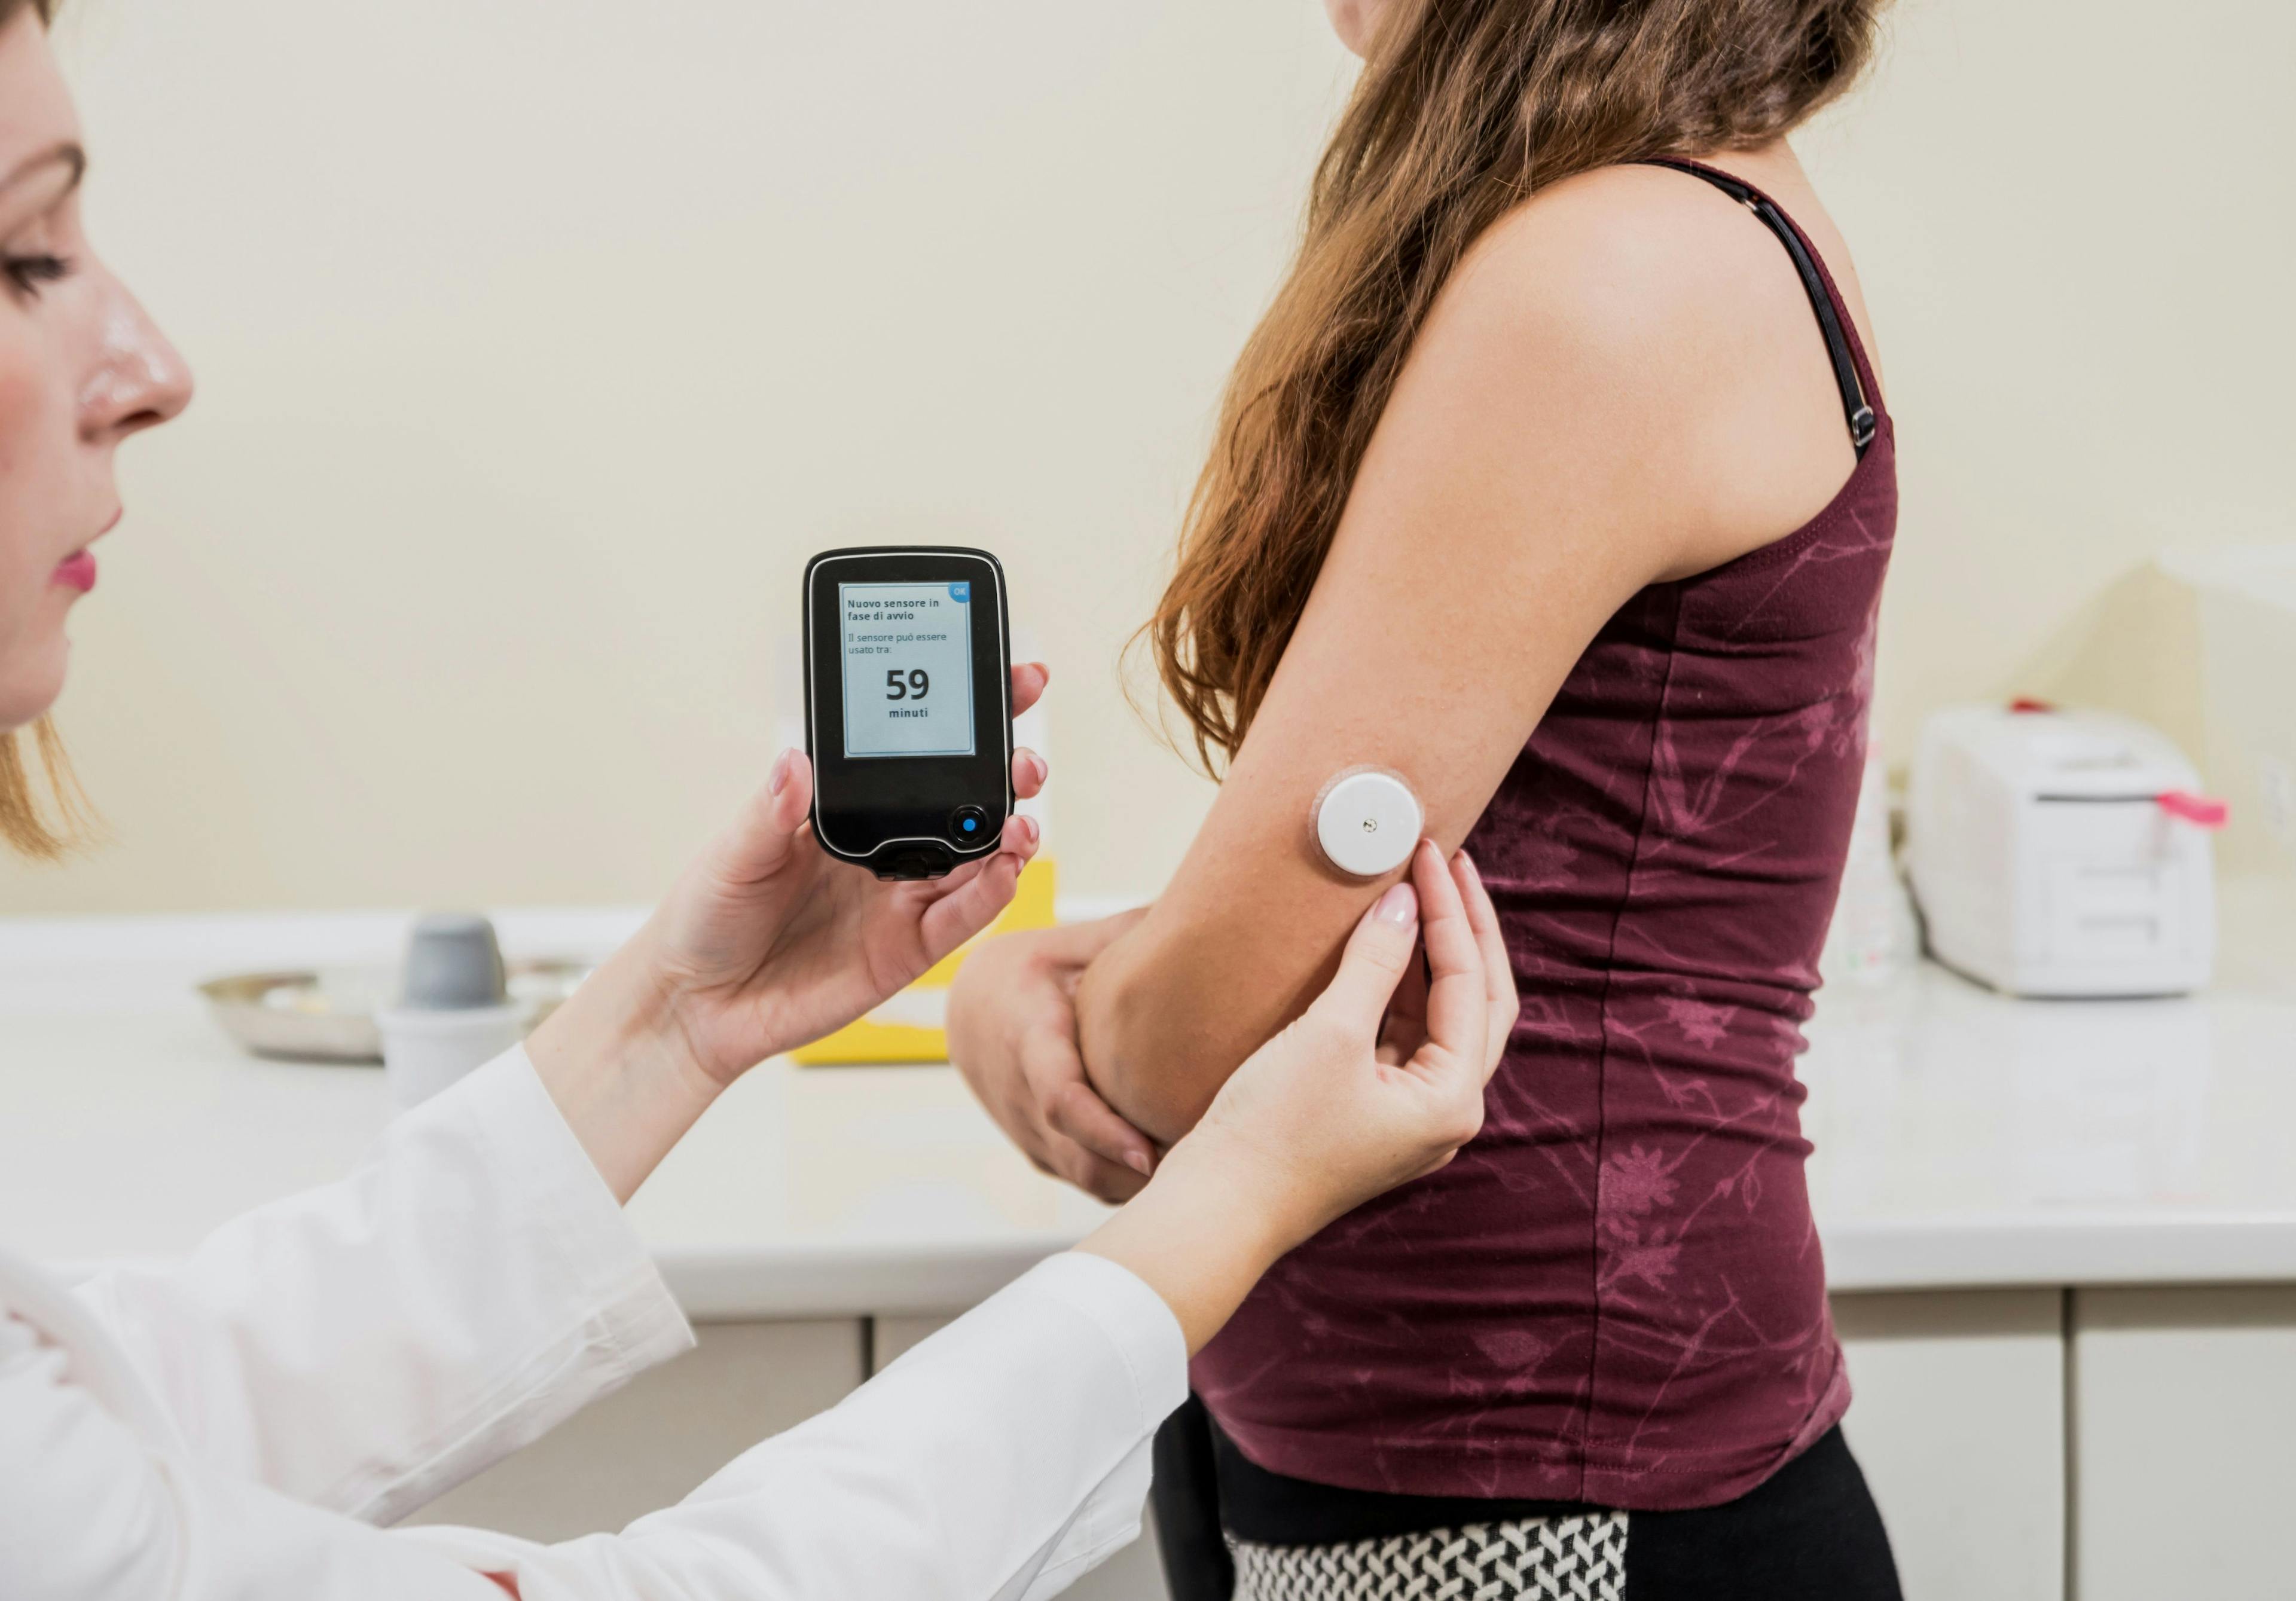 Pharmacist helping patient with CGM / romaset - stock.adobe.com